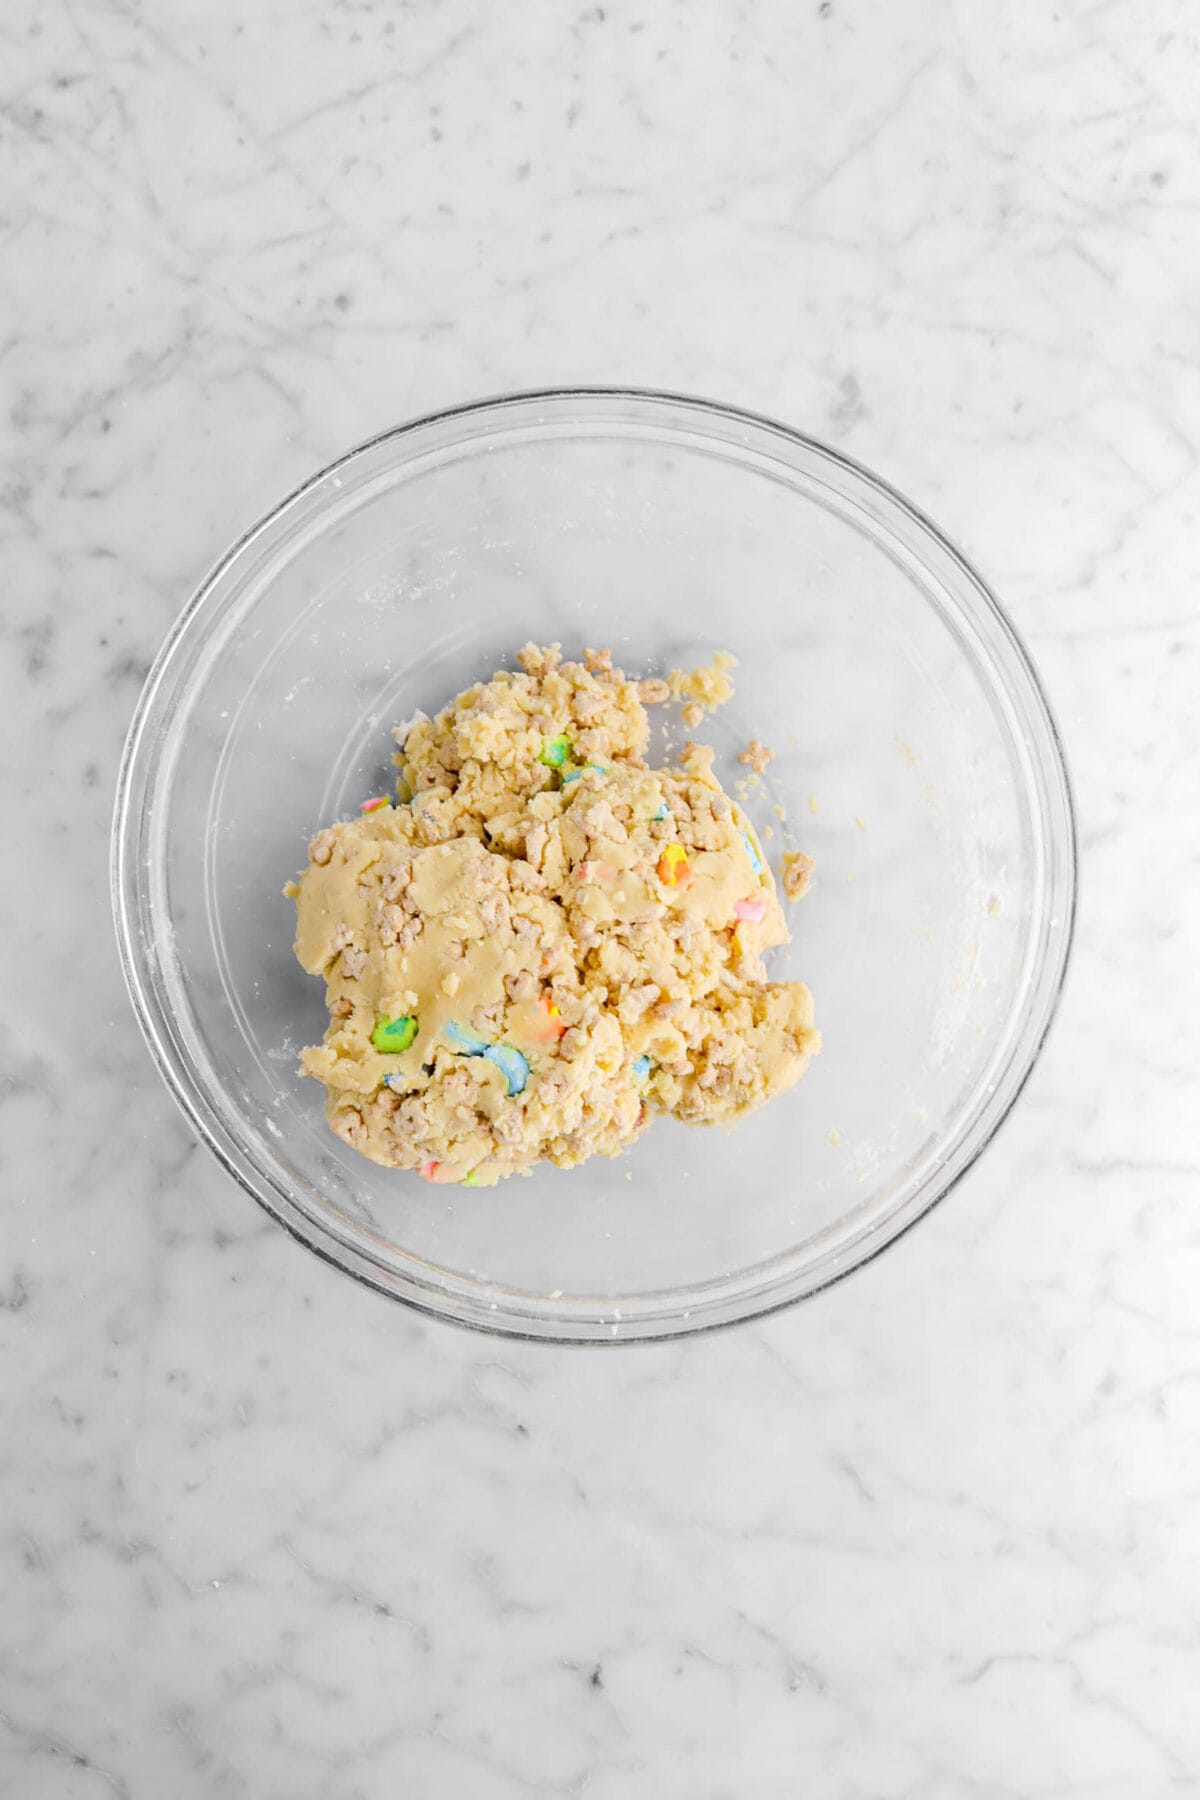 lucky charms stirred into cookie dough.